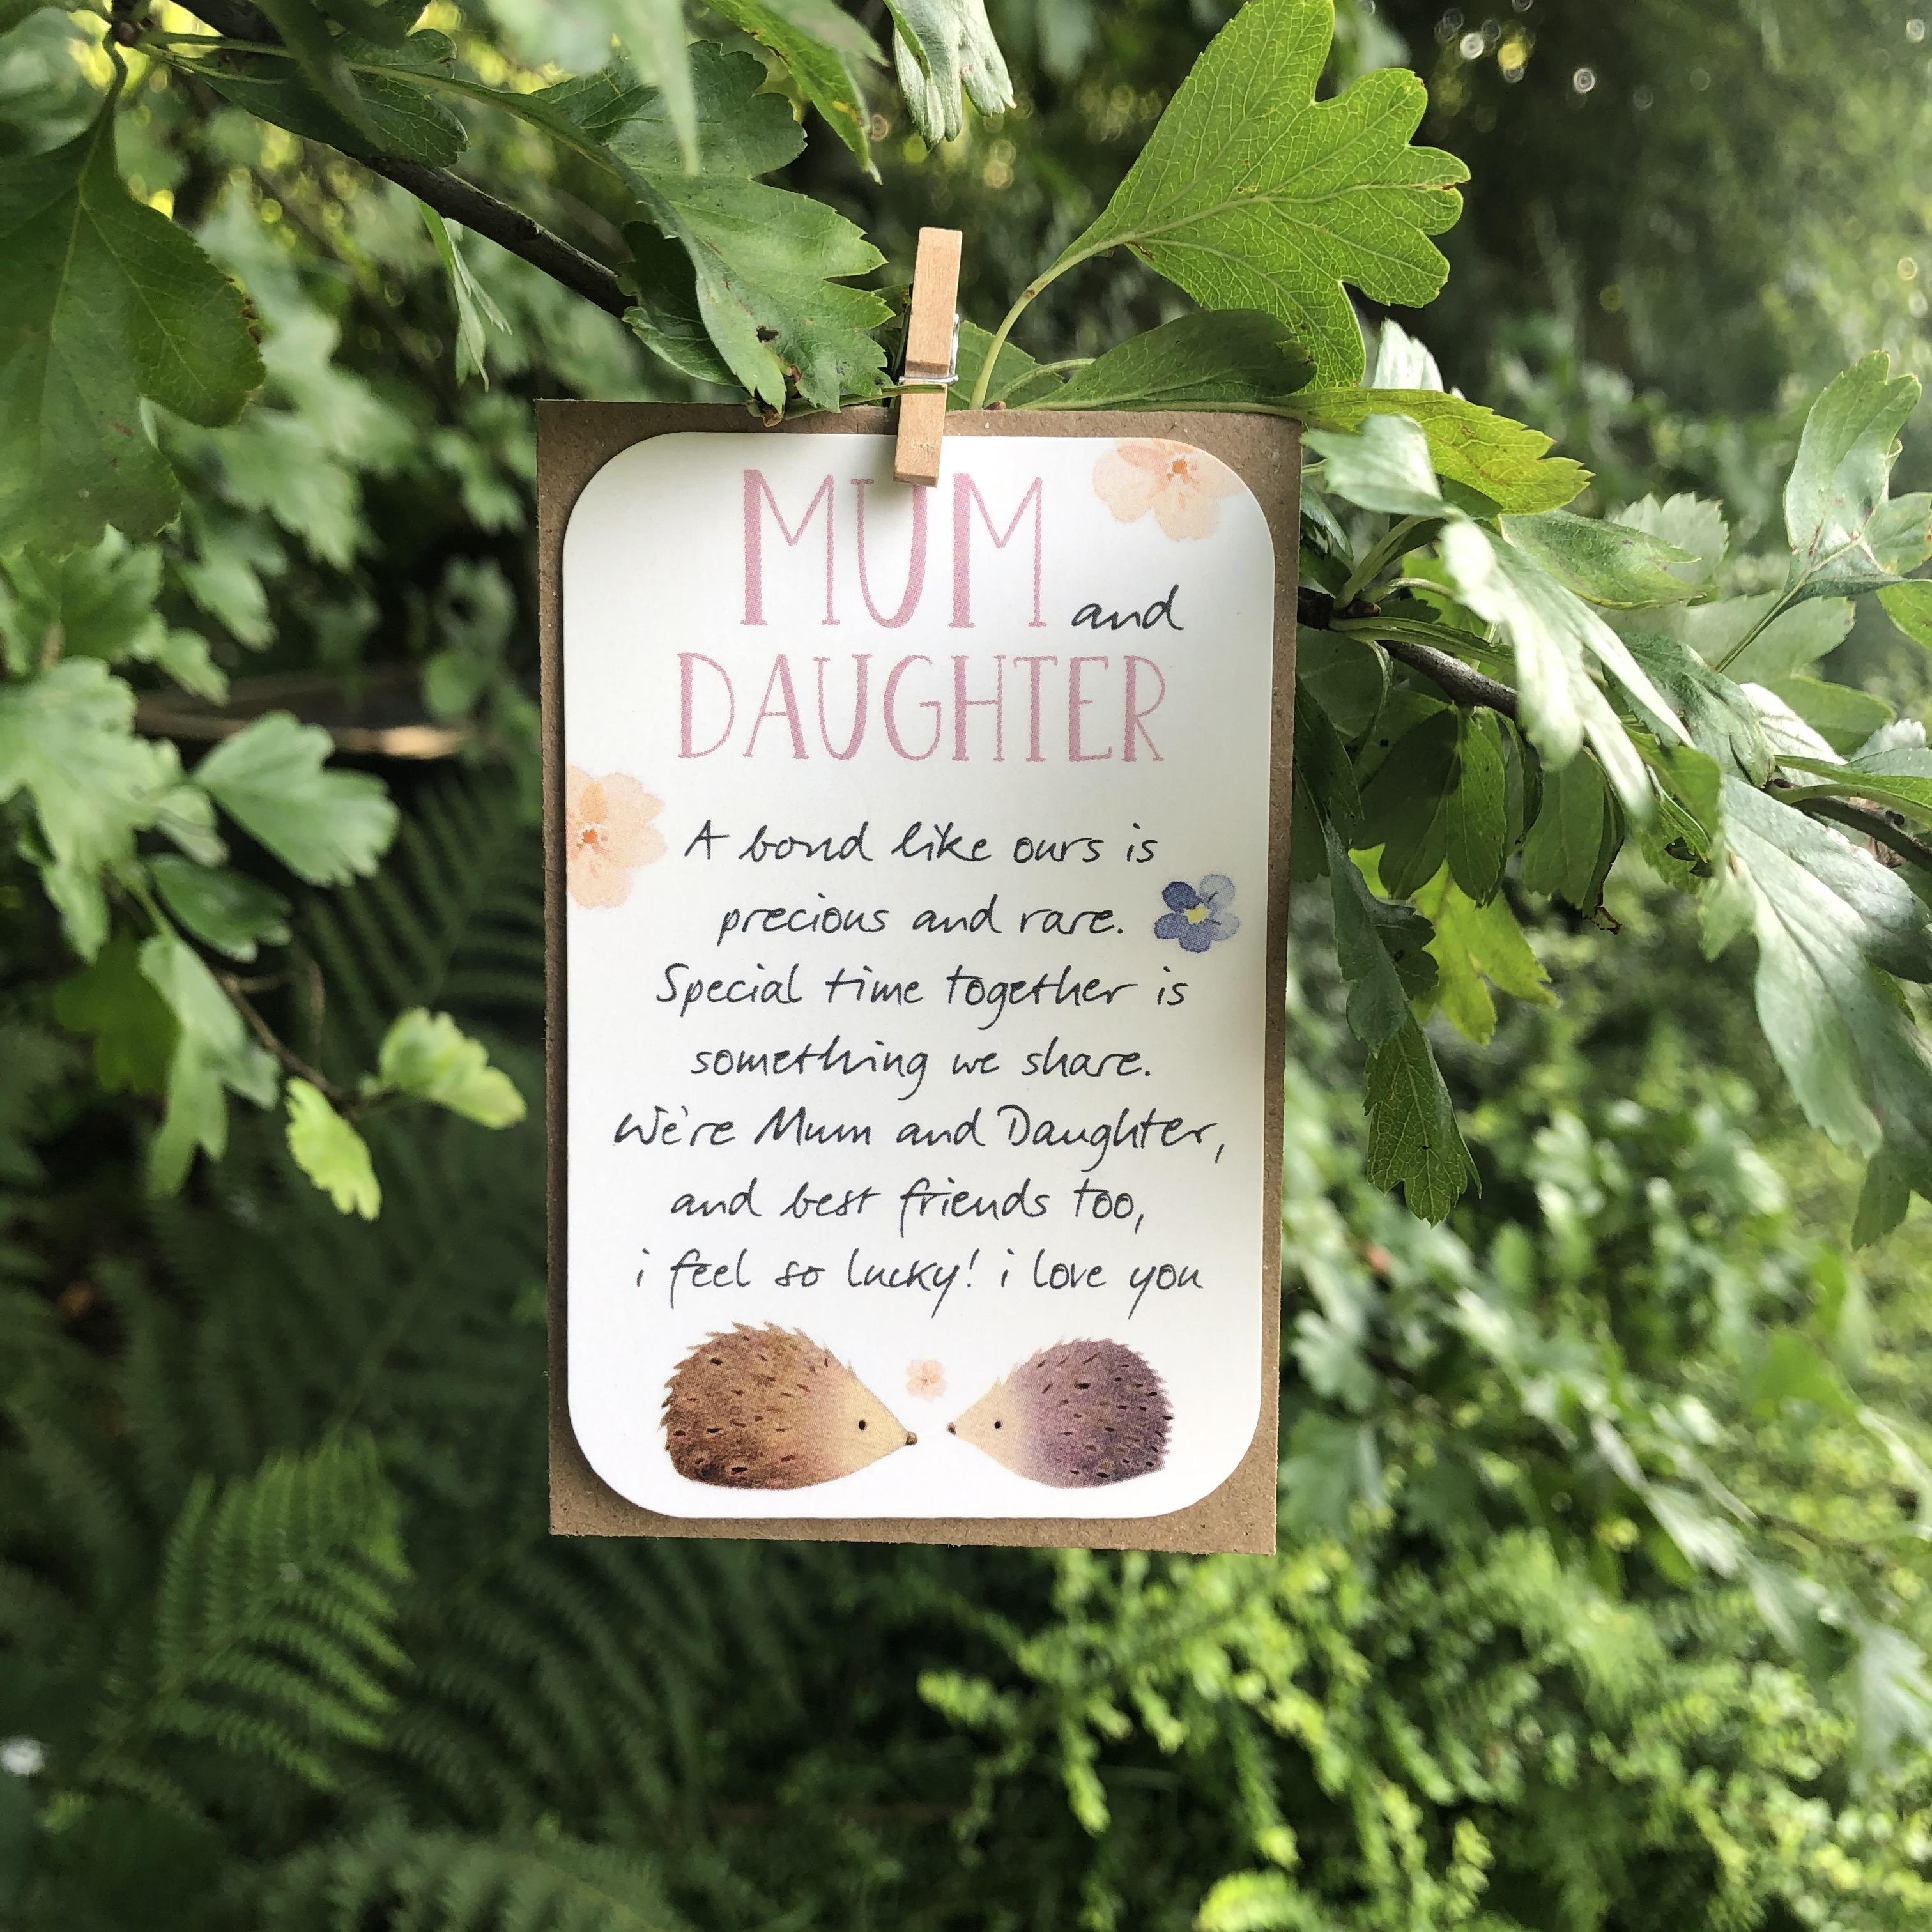 A small keepsake card with a 'Mum and Daughter' caption, and lovely little verse